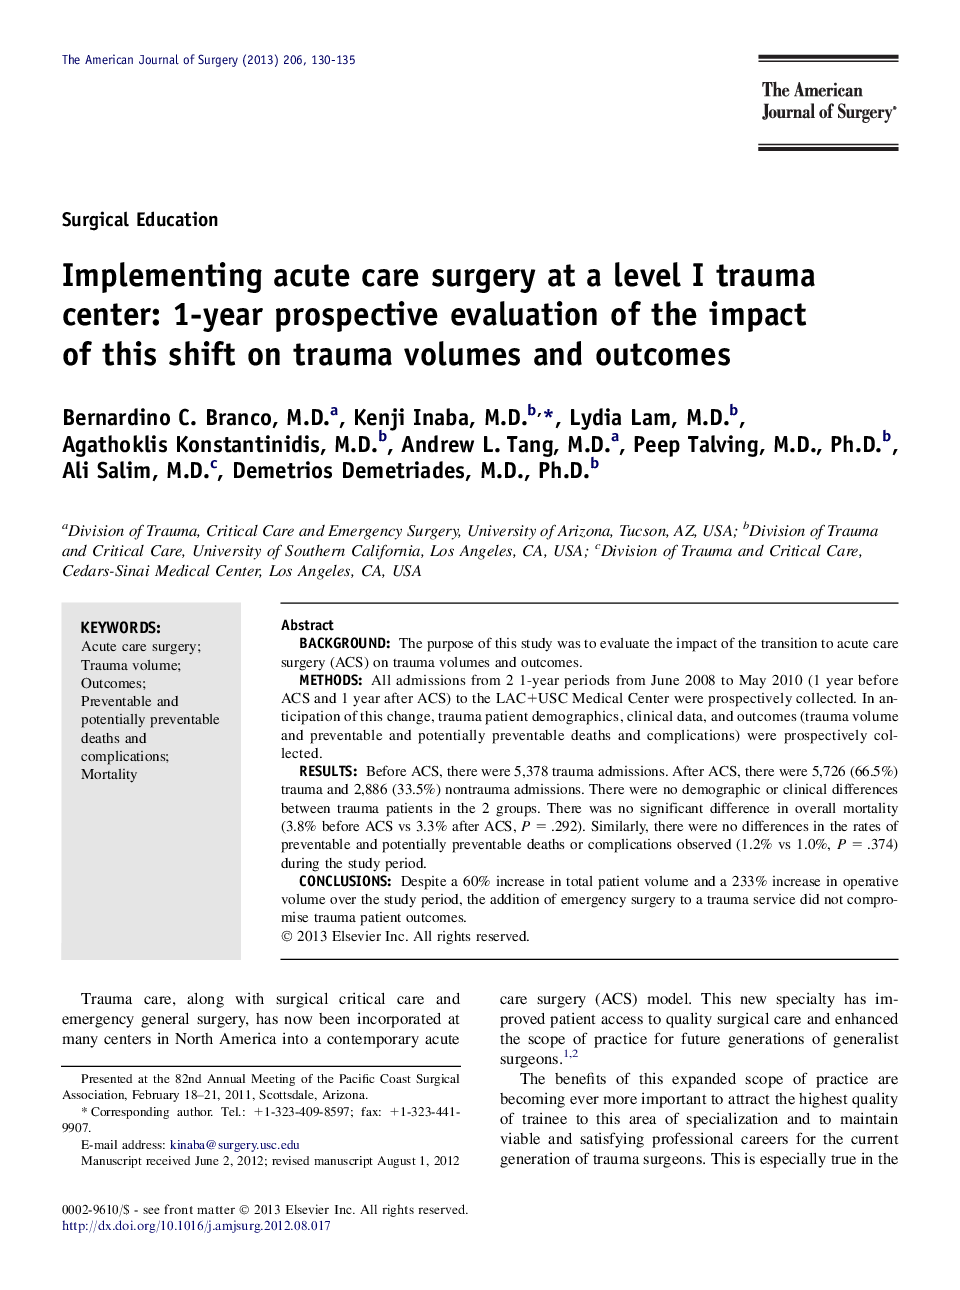 Implementing acute care surgery at a level I trauma center: 1-year prospective evaluation of the impact of this shift on trauma volumes and outcomes